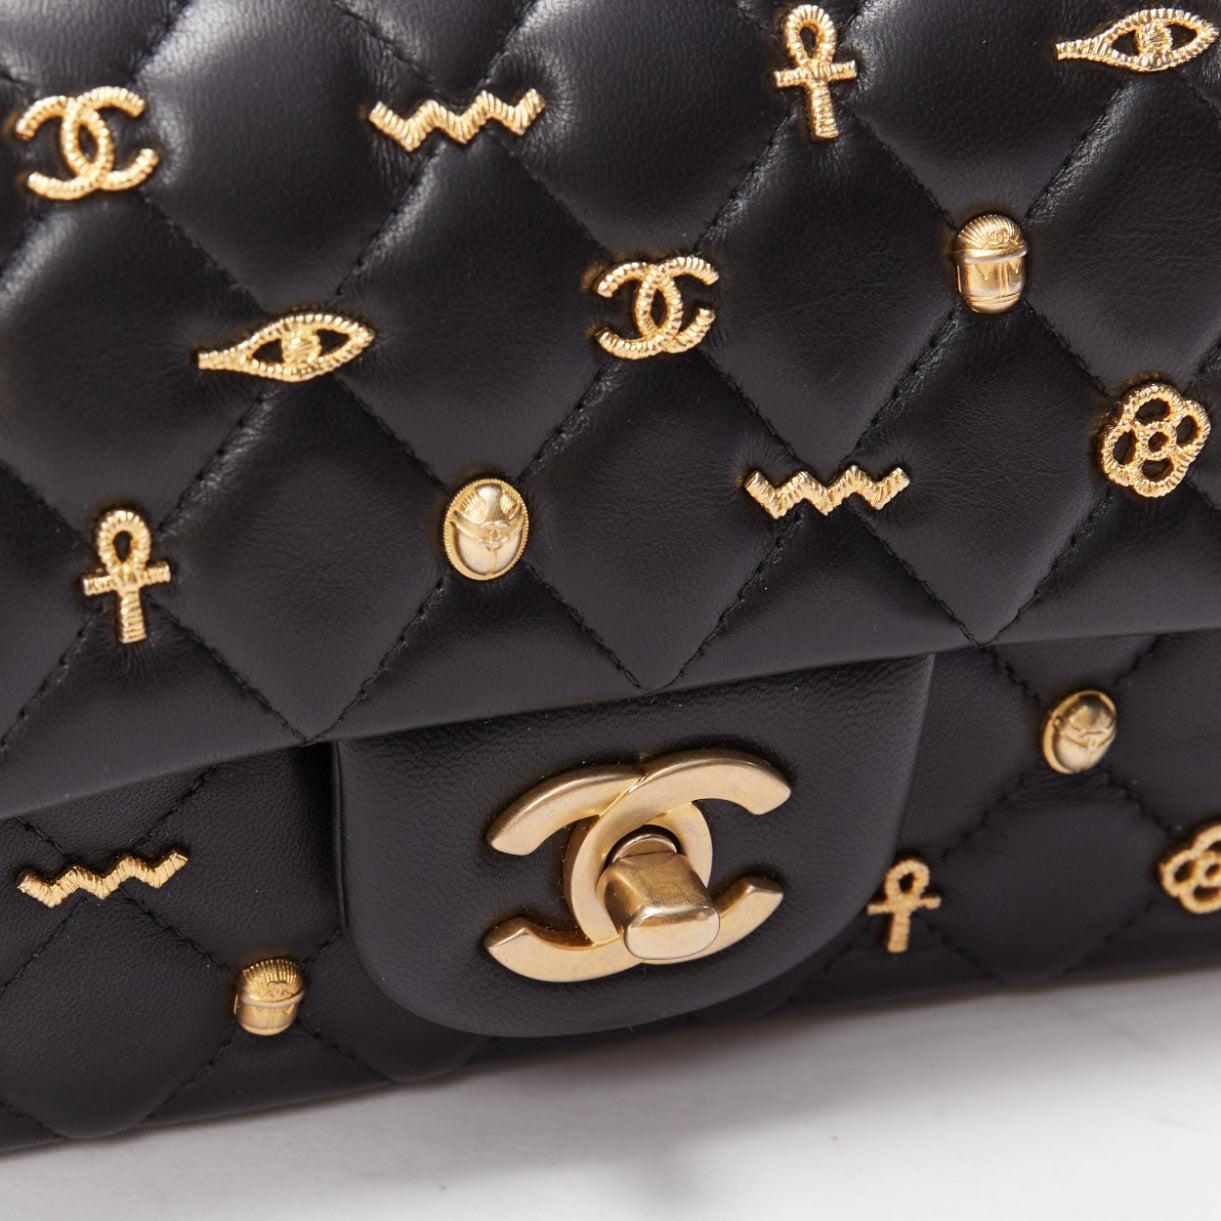 rare CHANEL 2019 Egyptian Amulet Limited Lucky Charms CC black leather flap bag For Sale 3